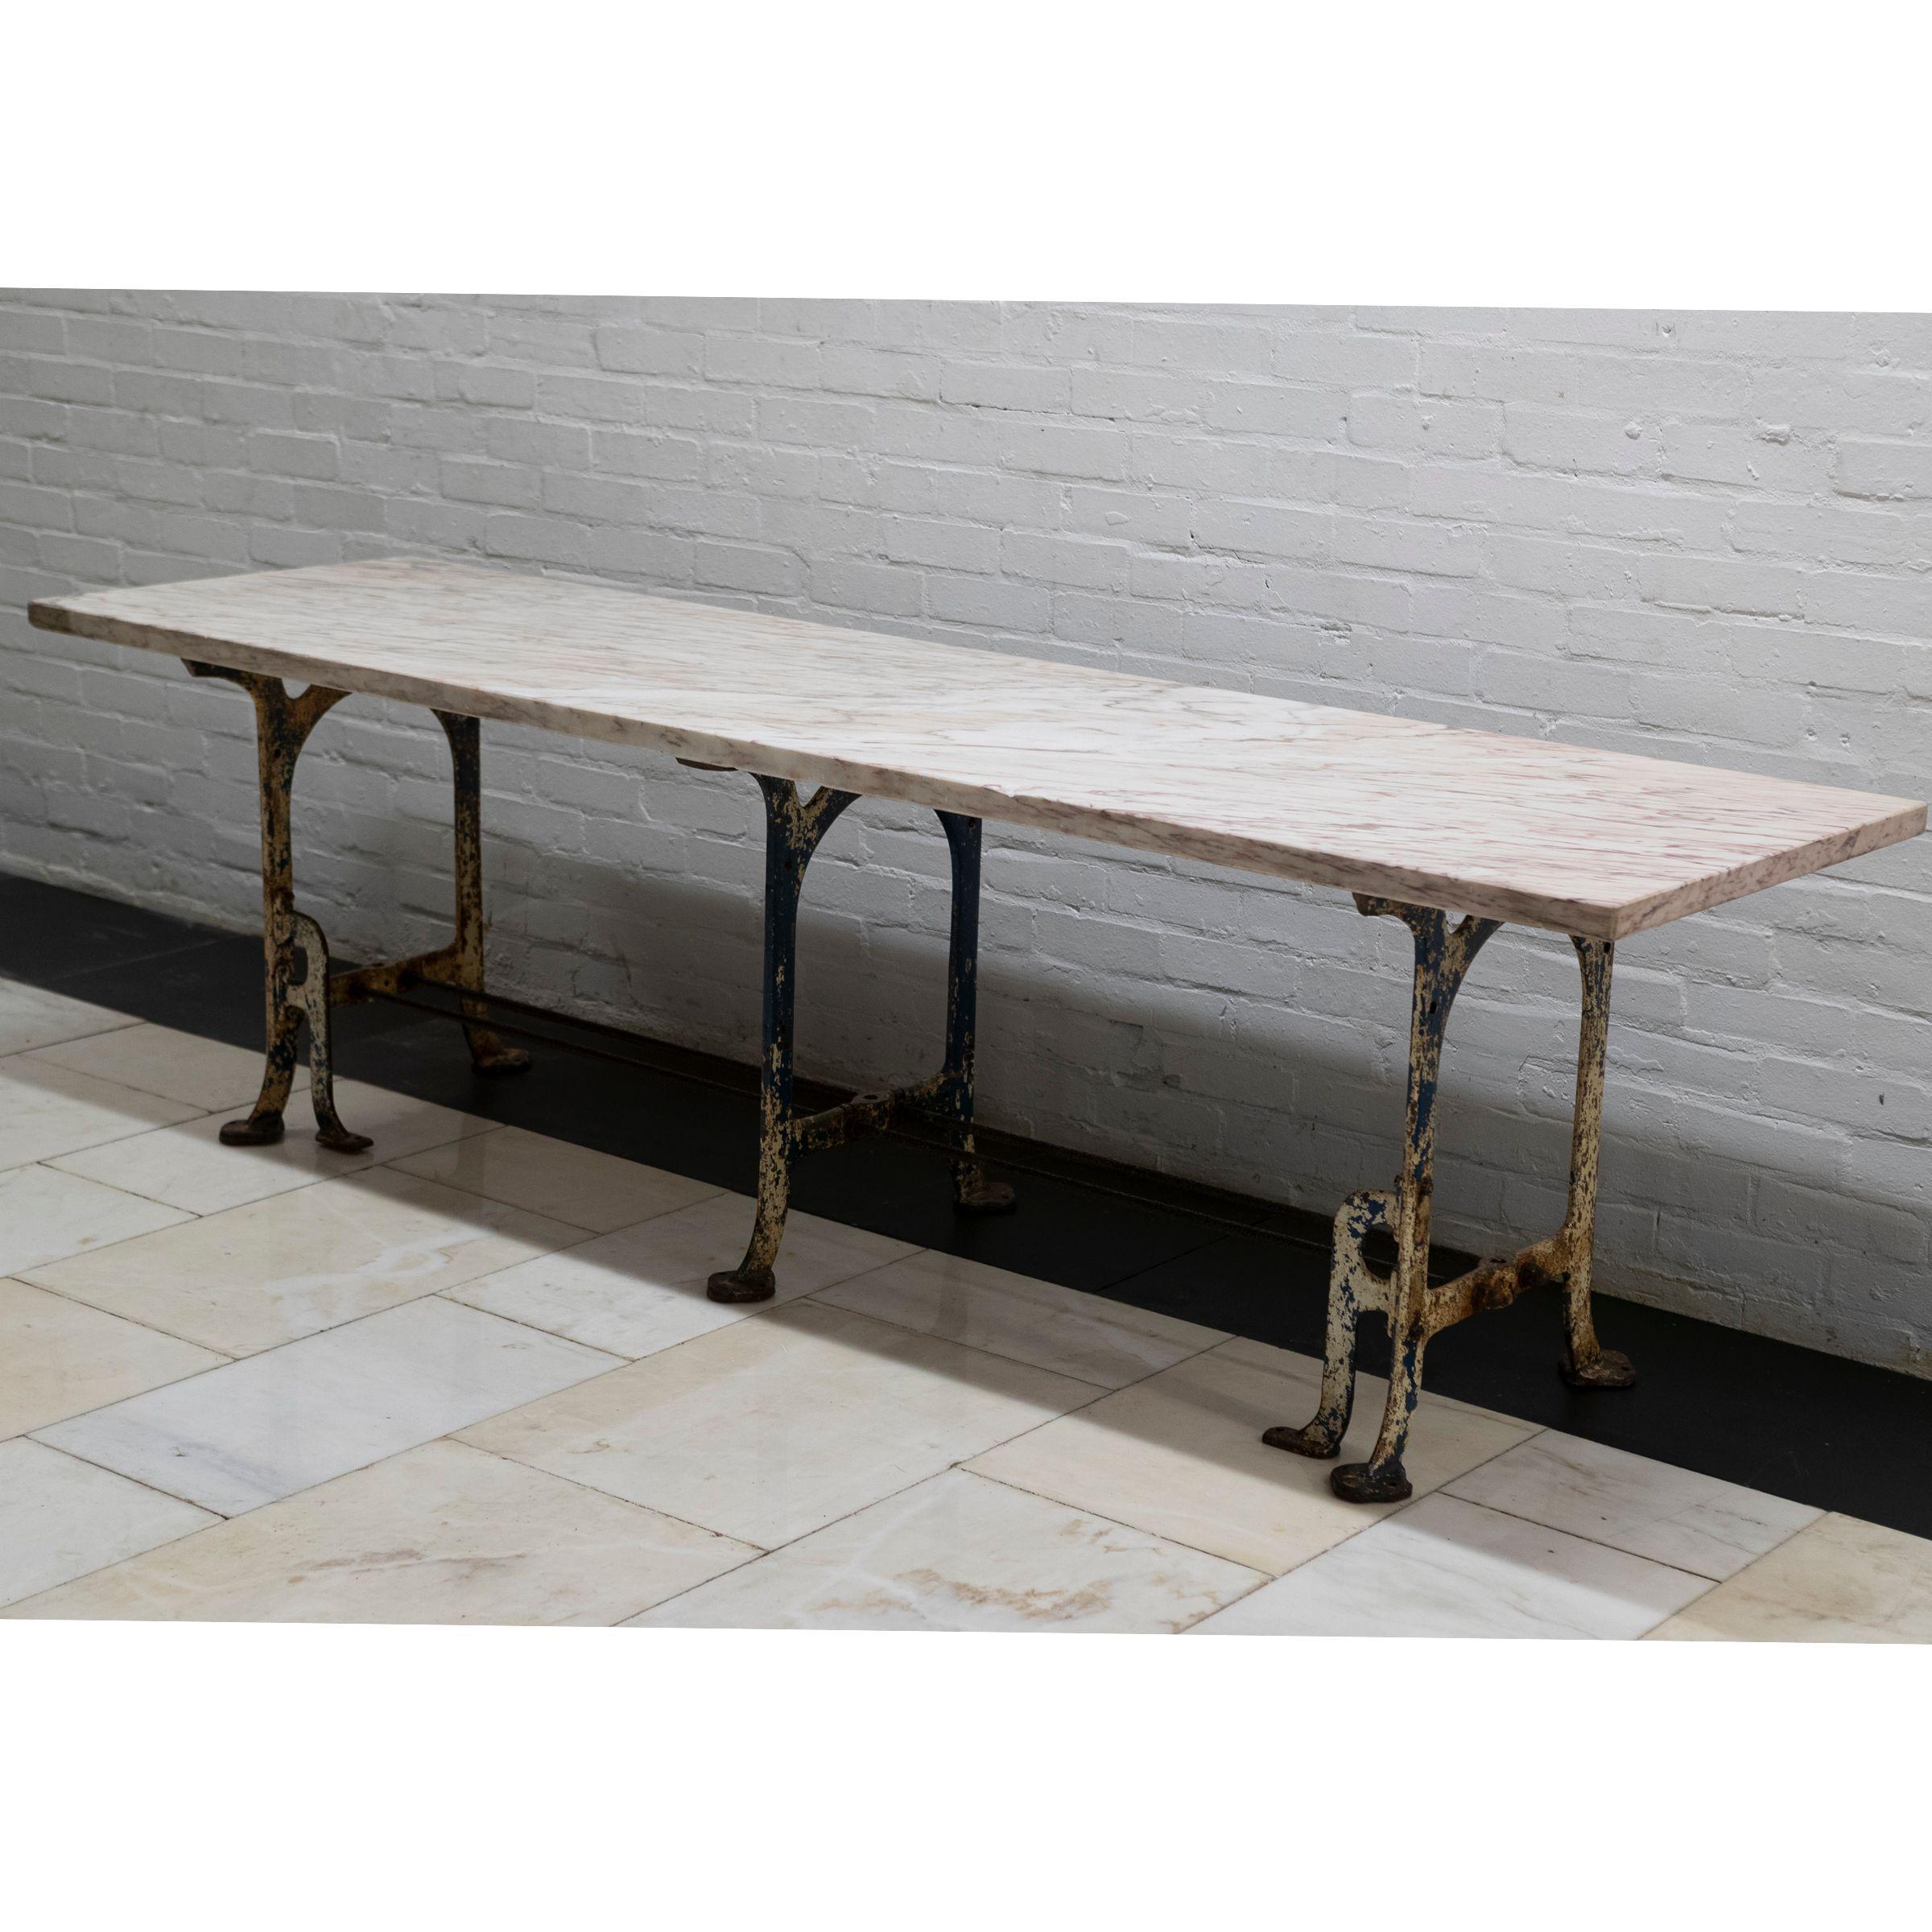 One of a kind, this statement table is constructed from a large piece of enigmatic Breche Rose Marble that sits upon an industrial cast iron base.

The large table makes for a unique and interesting dining table for a home or a display solution for